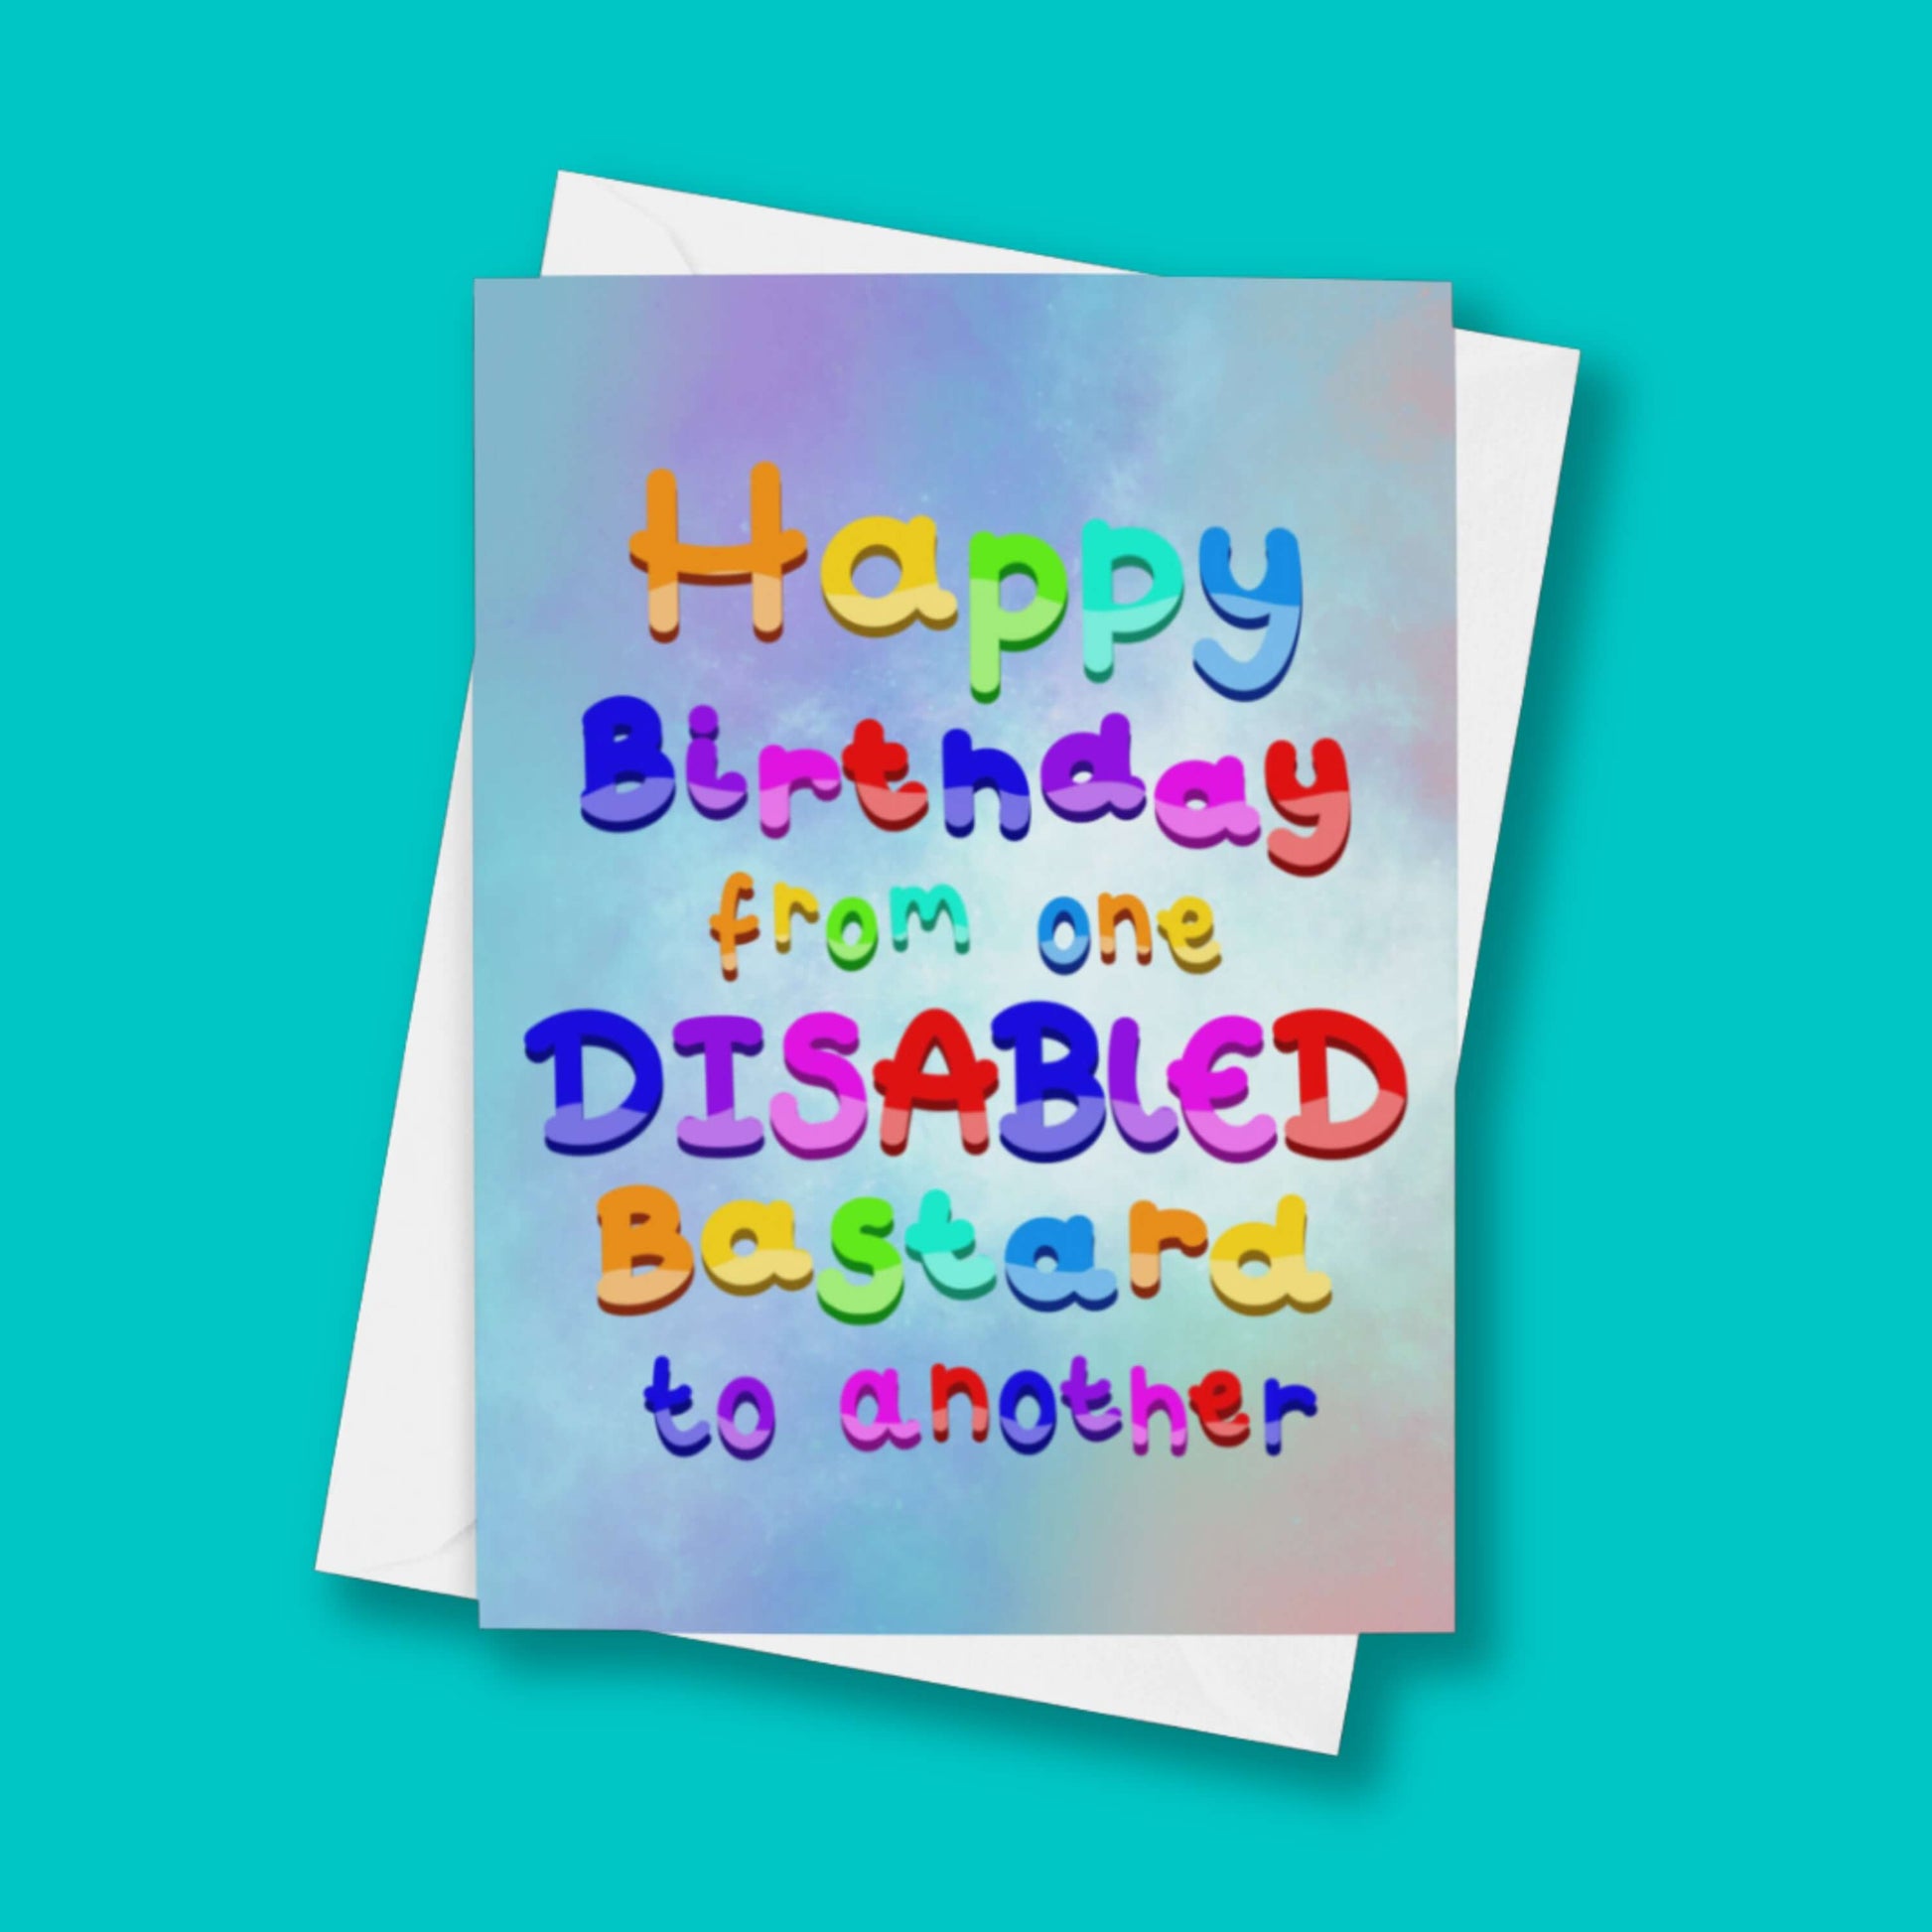 The Happy Birthday From One Disabled Bastard To Another Card on a  blue background with a white envelope underneath. The pastel blue and purple a6 birthday card has rainbow bubble writing reading 'happy birthday from one disabled bastard to another'. The hand drawn design is a humorous greeting card raising awareness for disabled people.